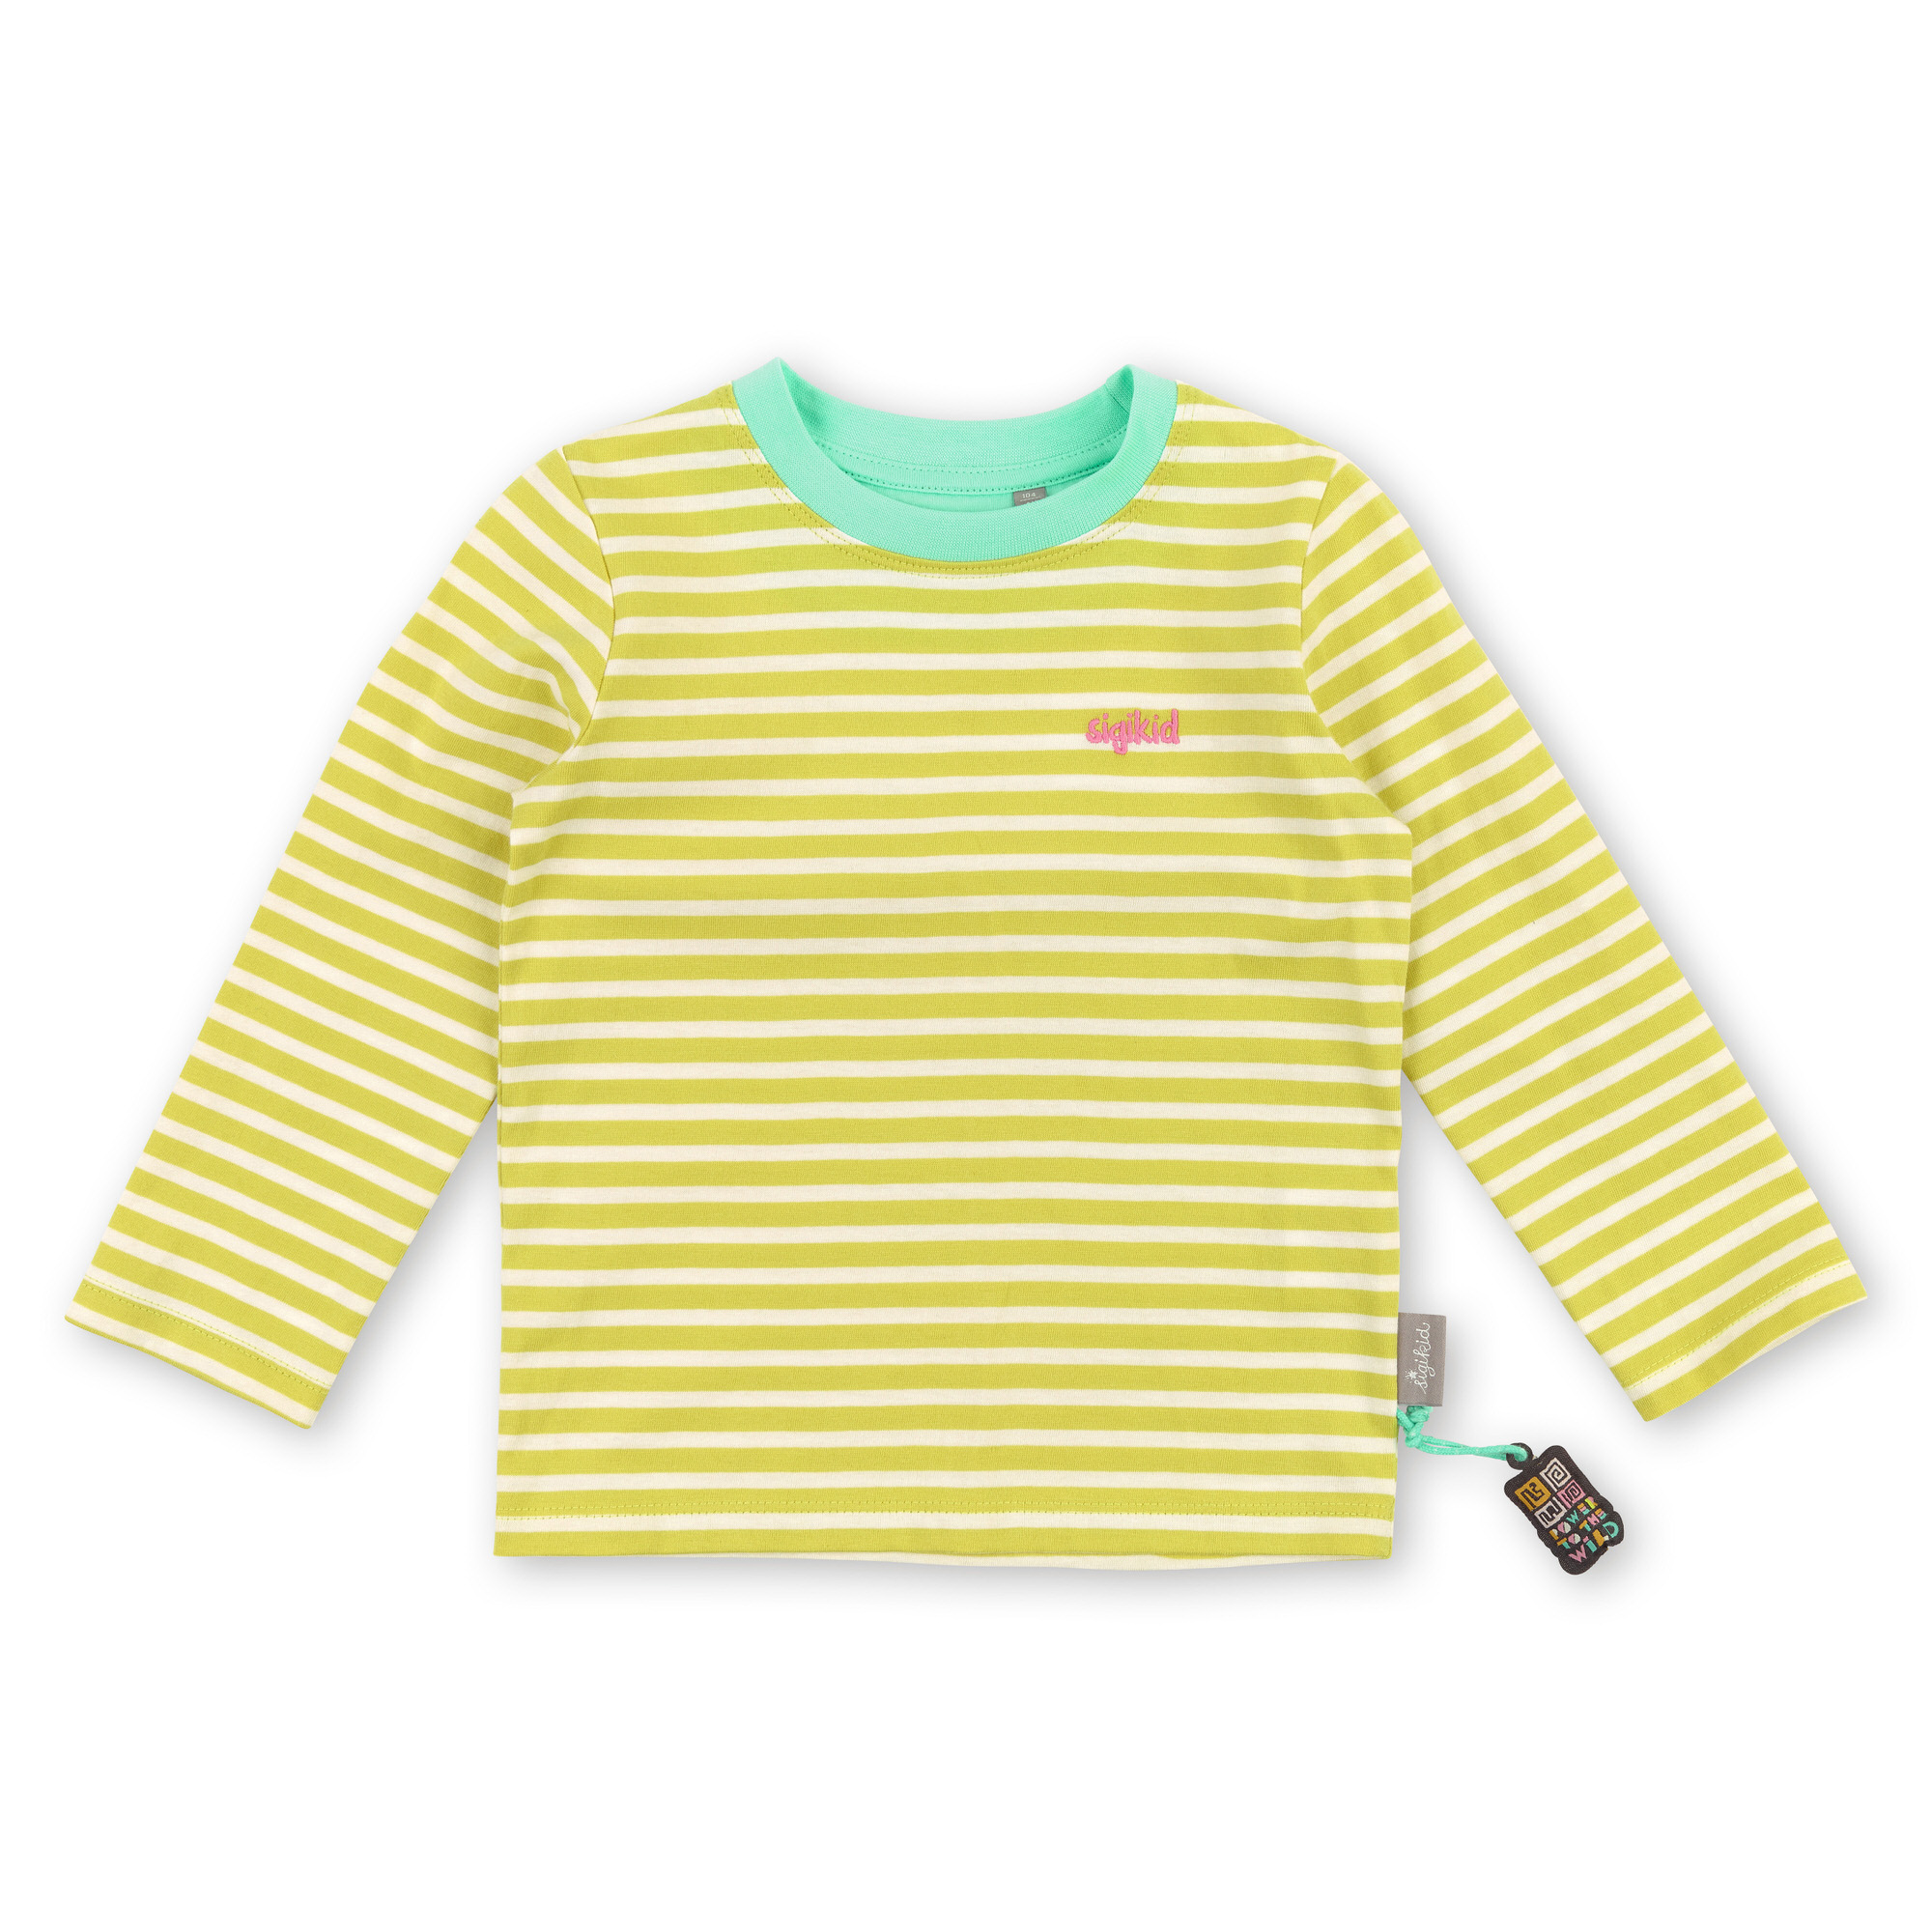 Casual long sleeve Tee for girls, white/yellow striped